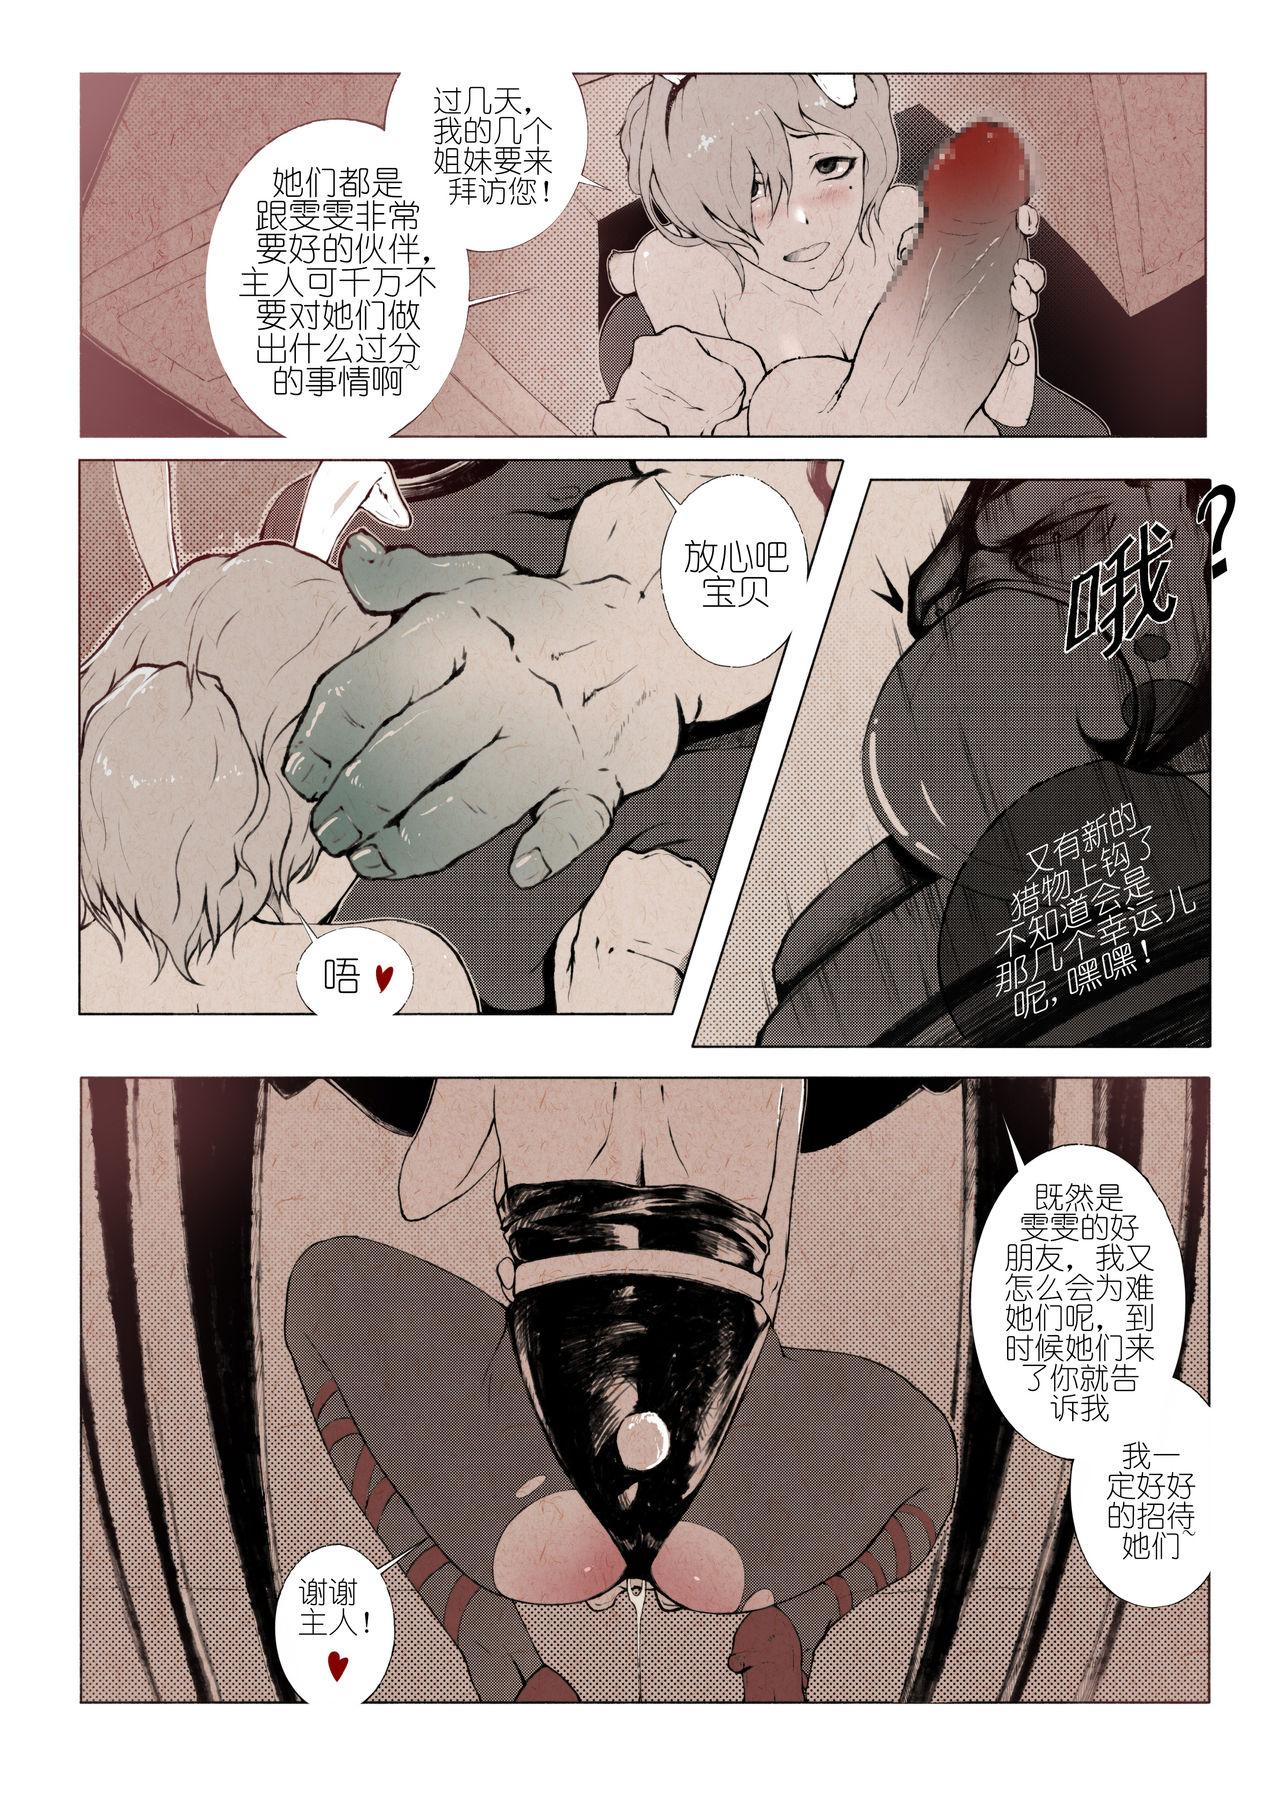 Licking Pussy R18厄加特酒馆（中篇） - League of legends Big breasts - Page 2